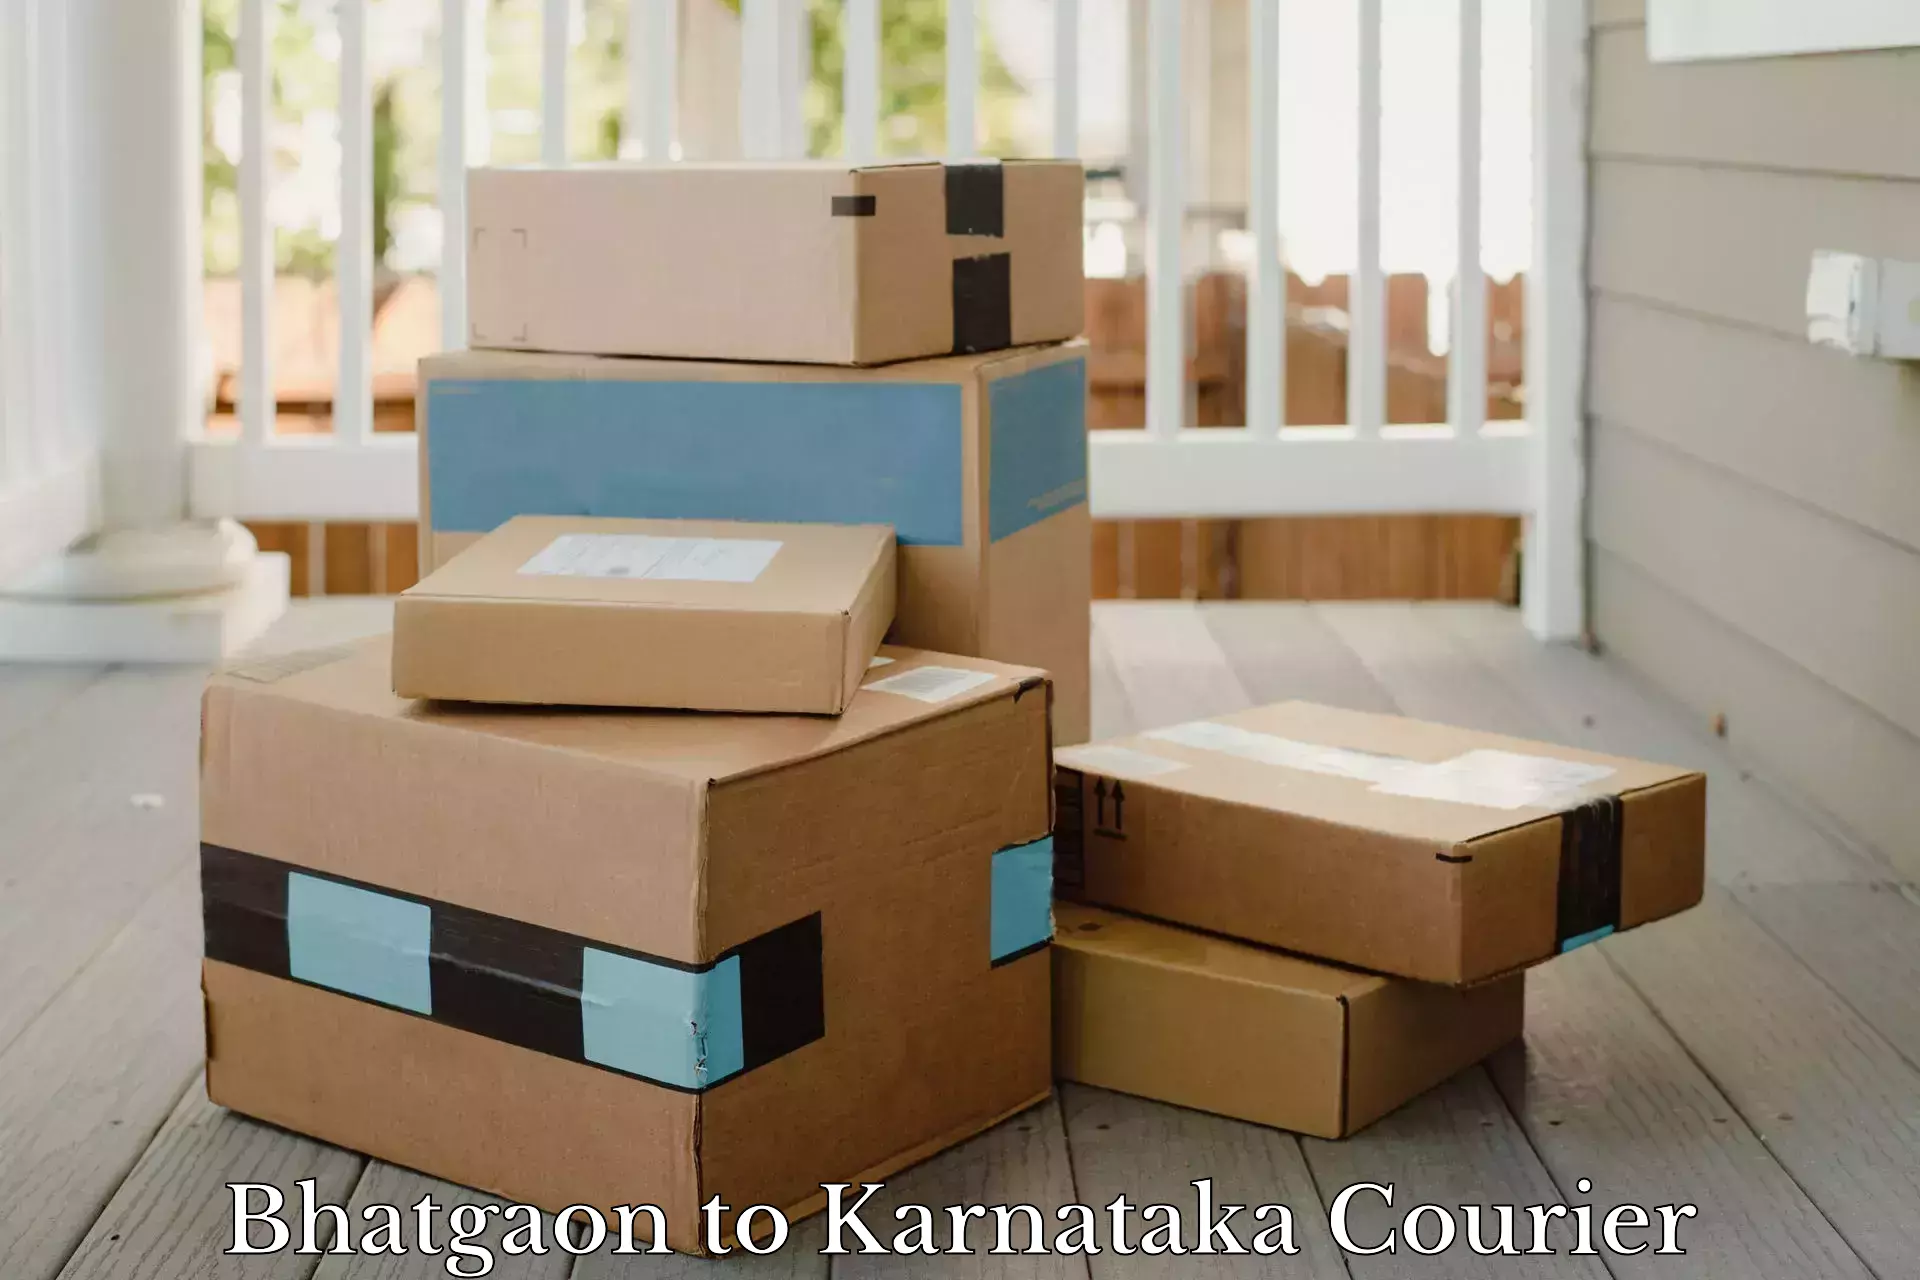 Express delivery solutions in Bhatgaon to Kollegal